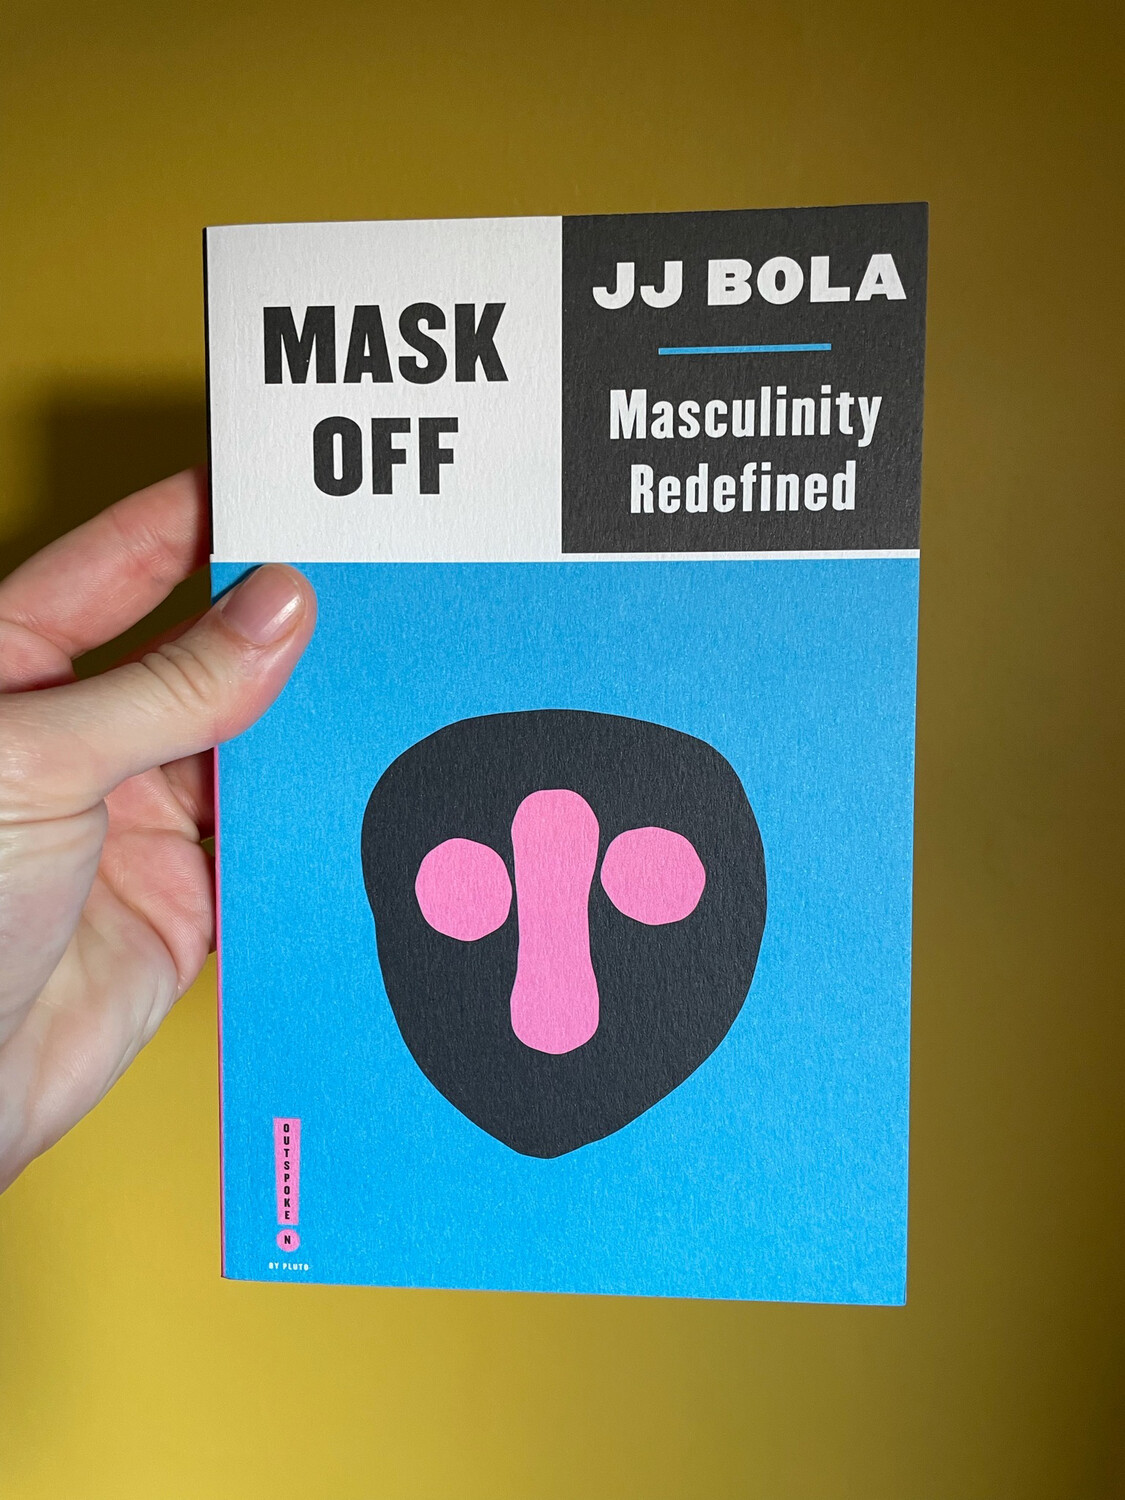 Mask Off: Masculinity Redefined By J J Bola